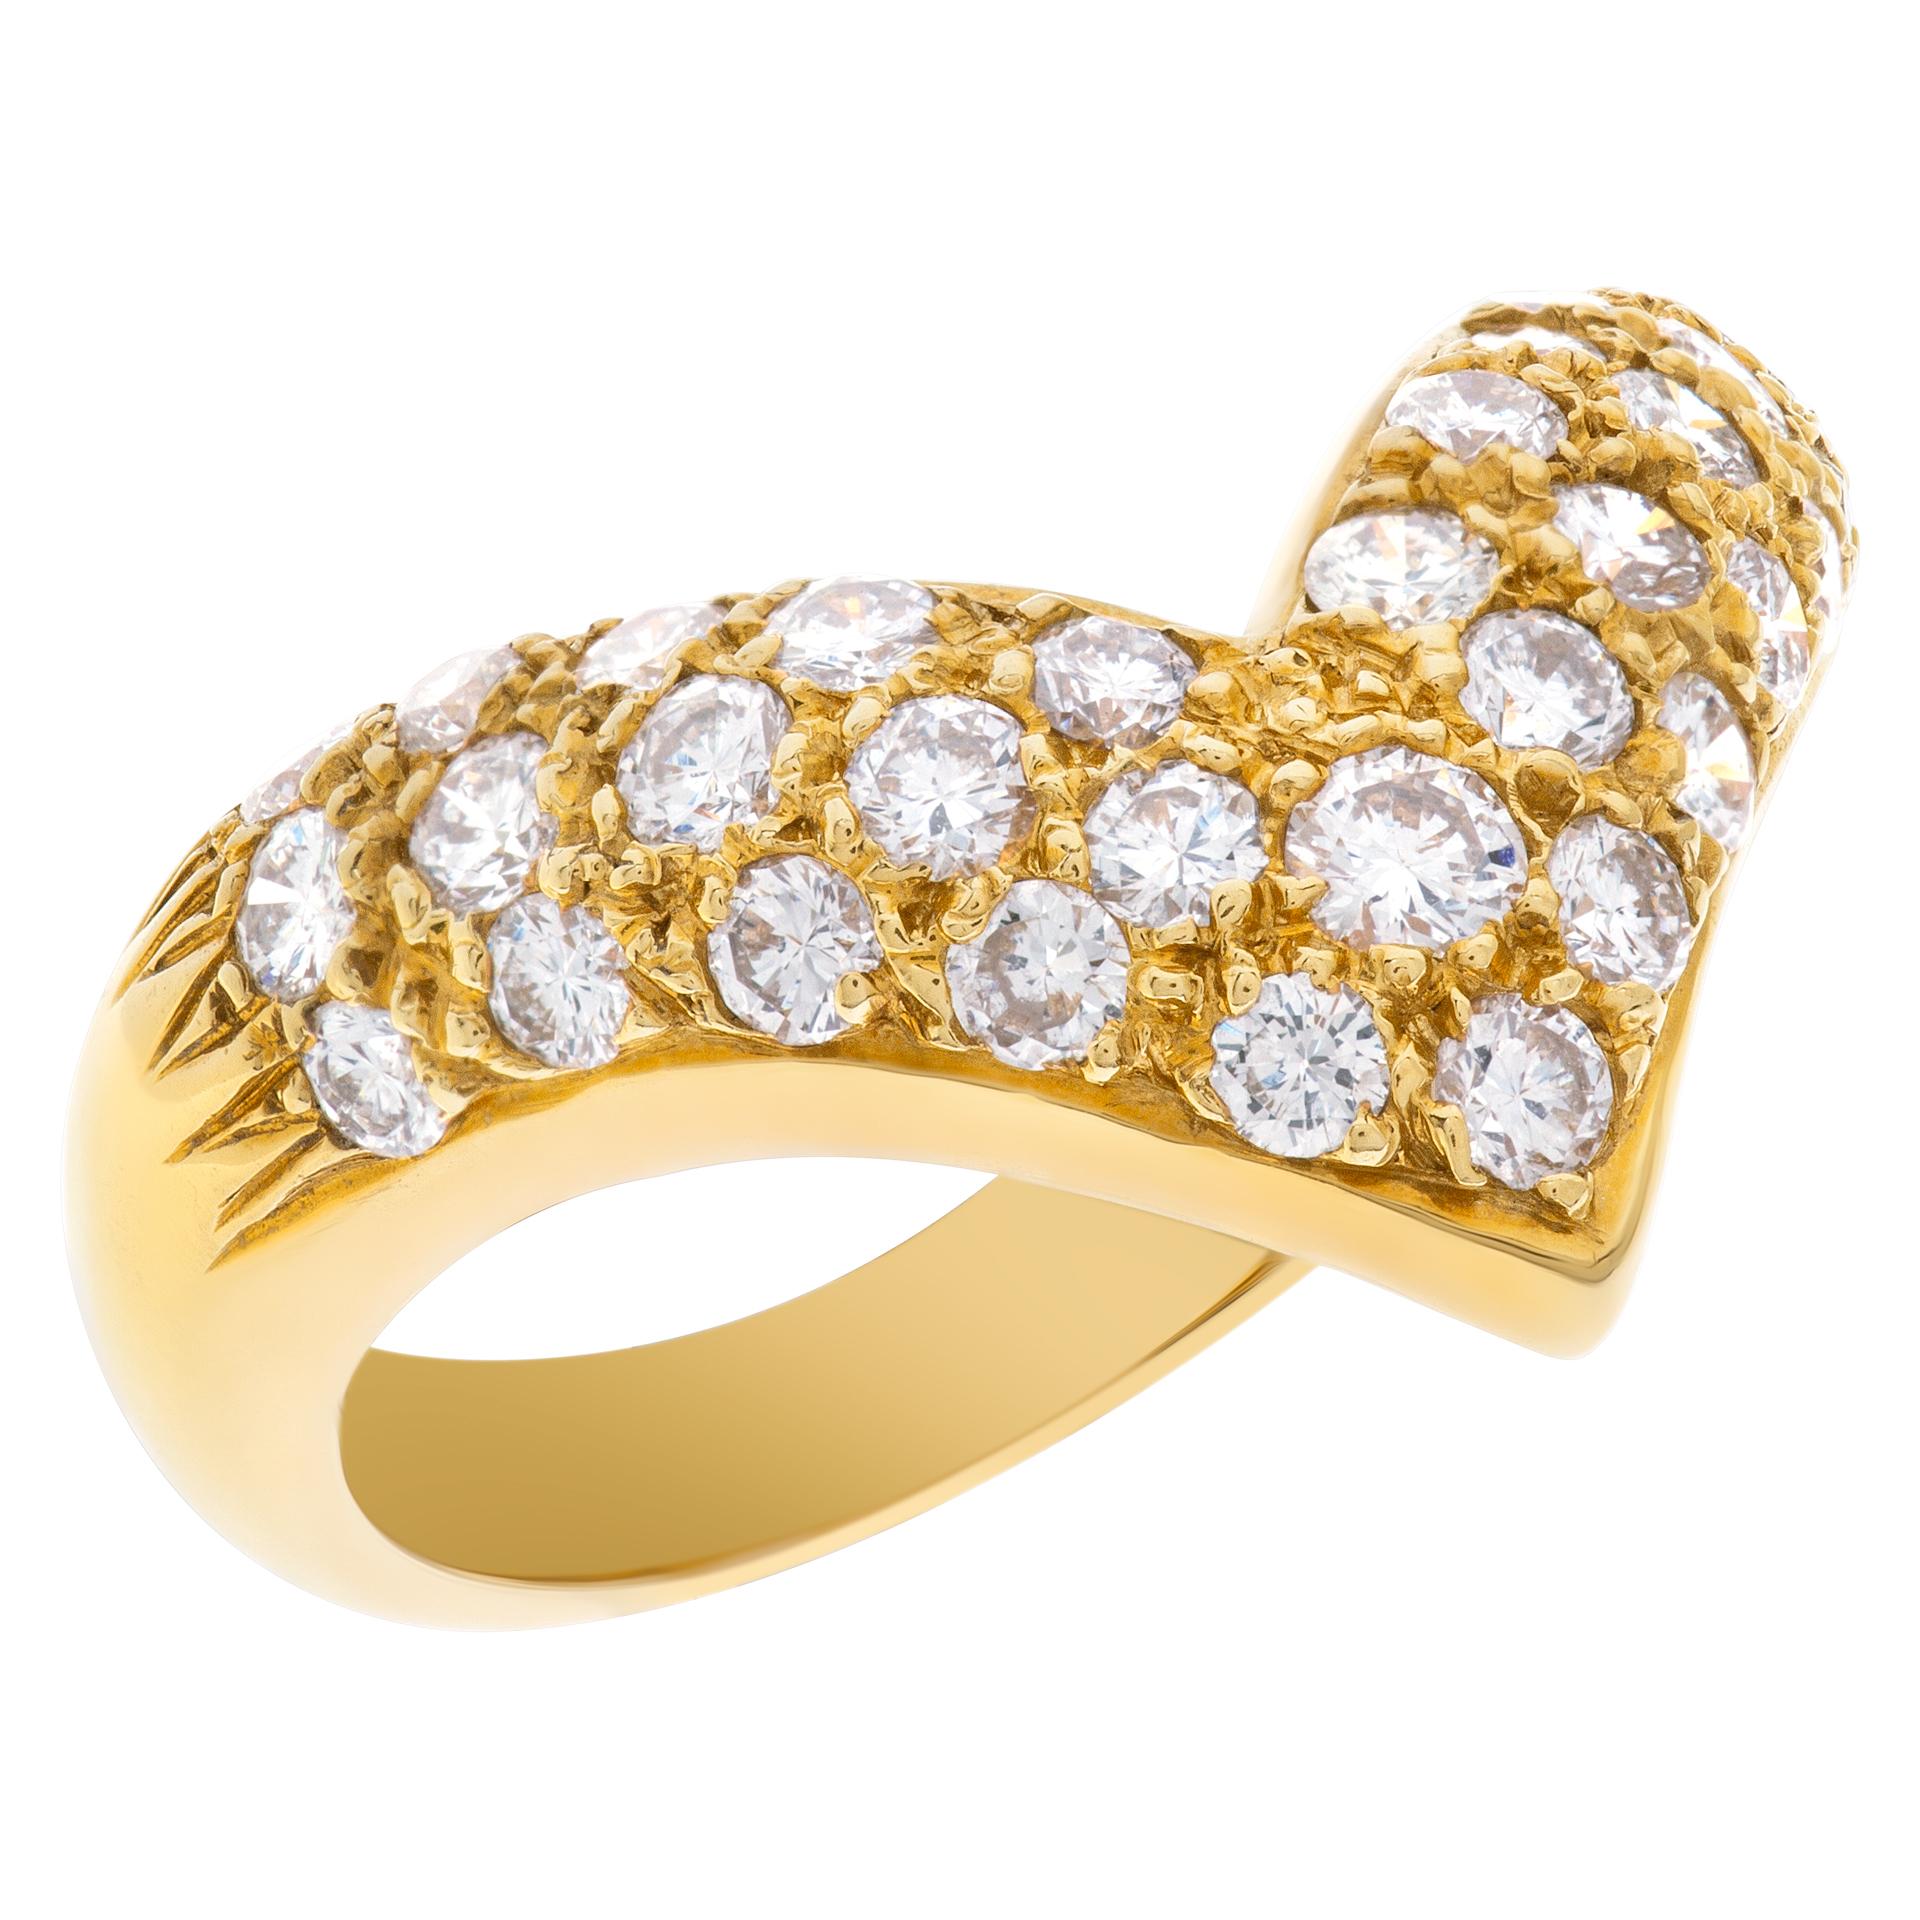 Diamond V Ring in 18k Yellow Gold In Excellent Condition For Sale In Surfside, FL